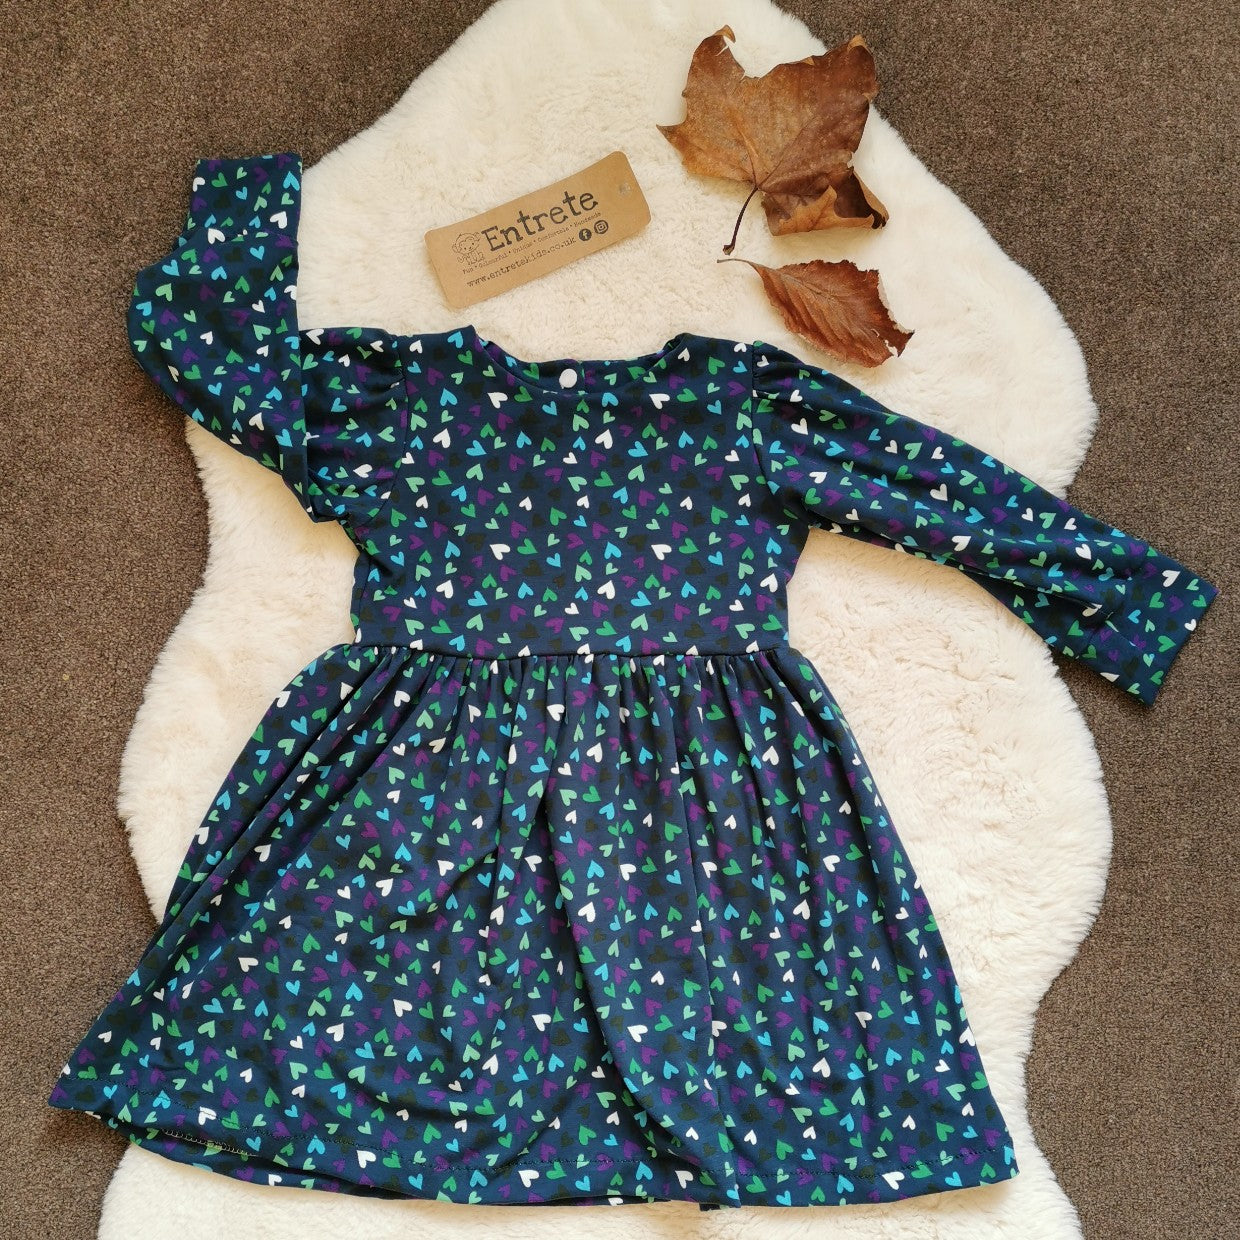 Girls & Babies back popper dress. Handmade in teal hearts cotton jersey. Shown with long sleeves.